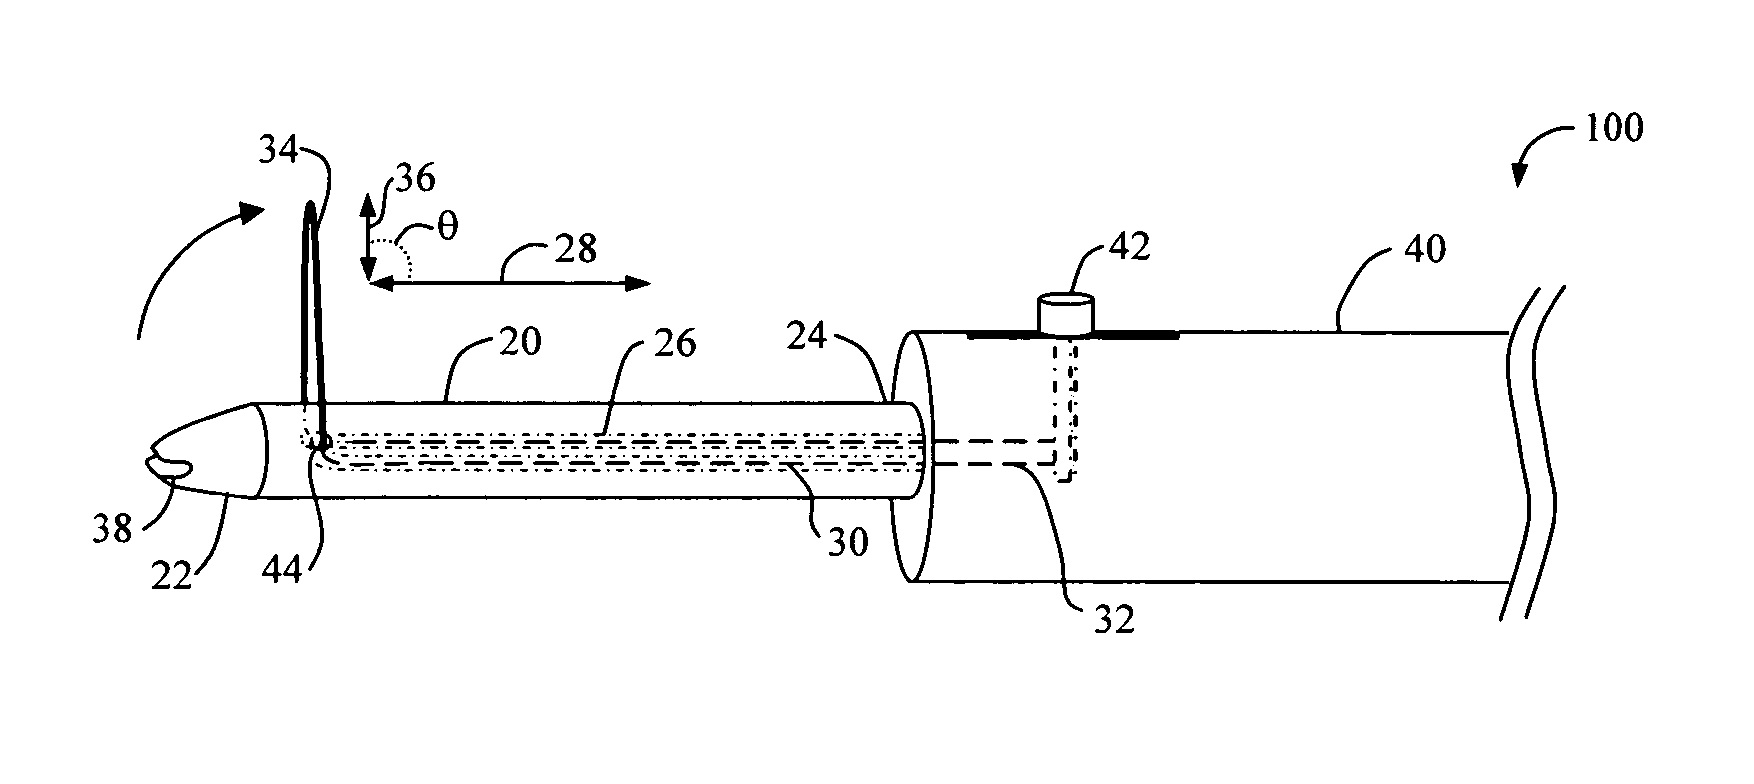 Bendable cutting device